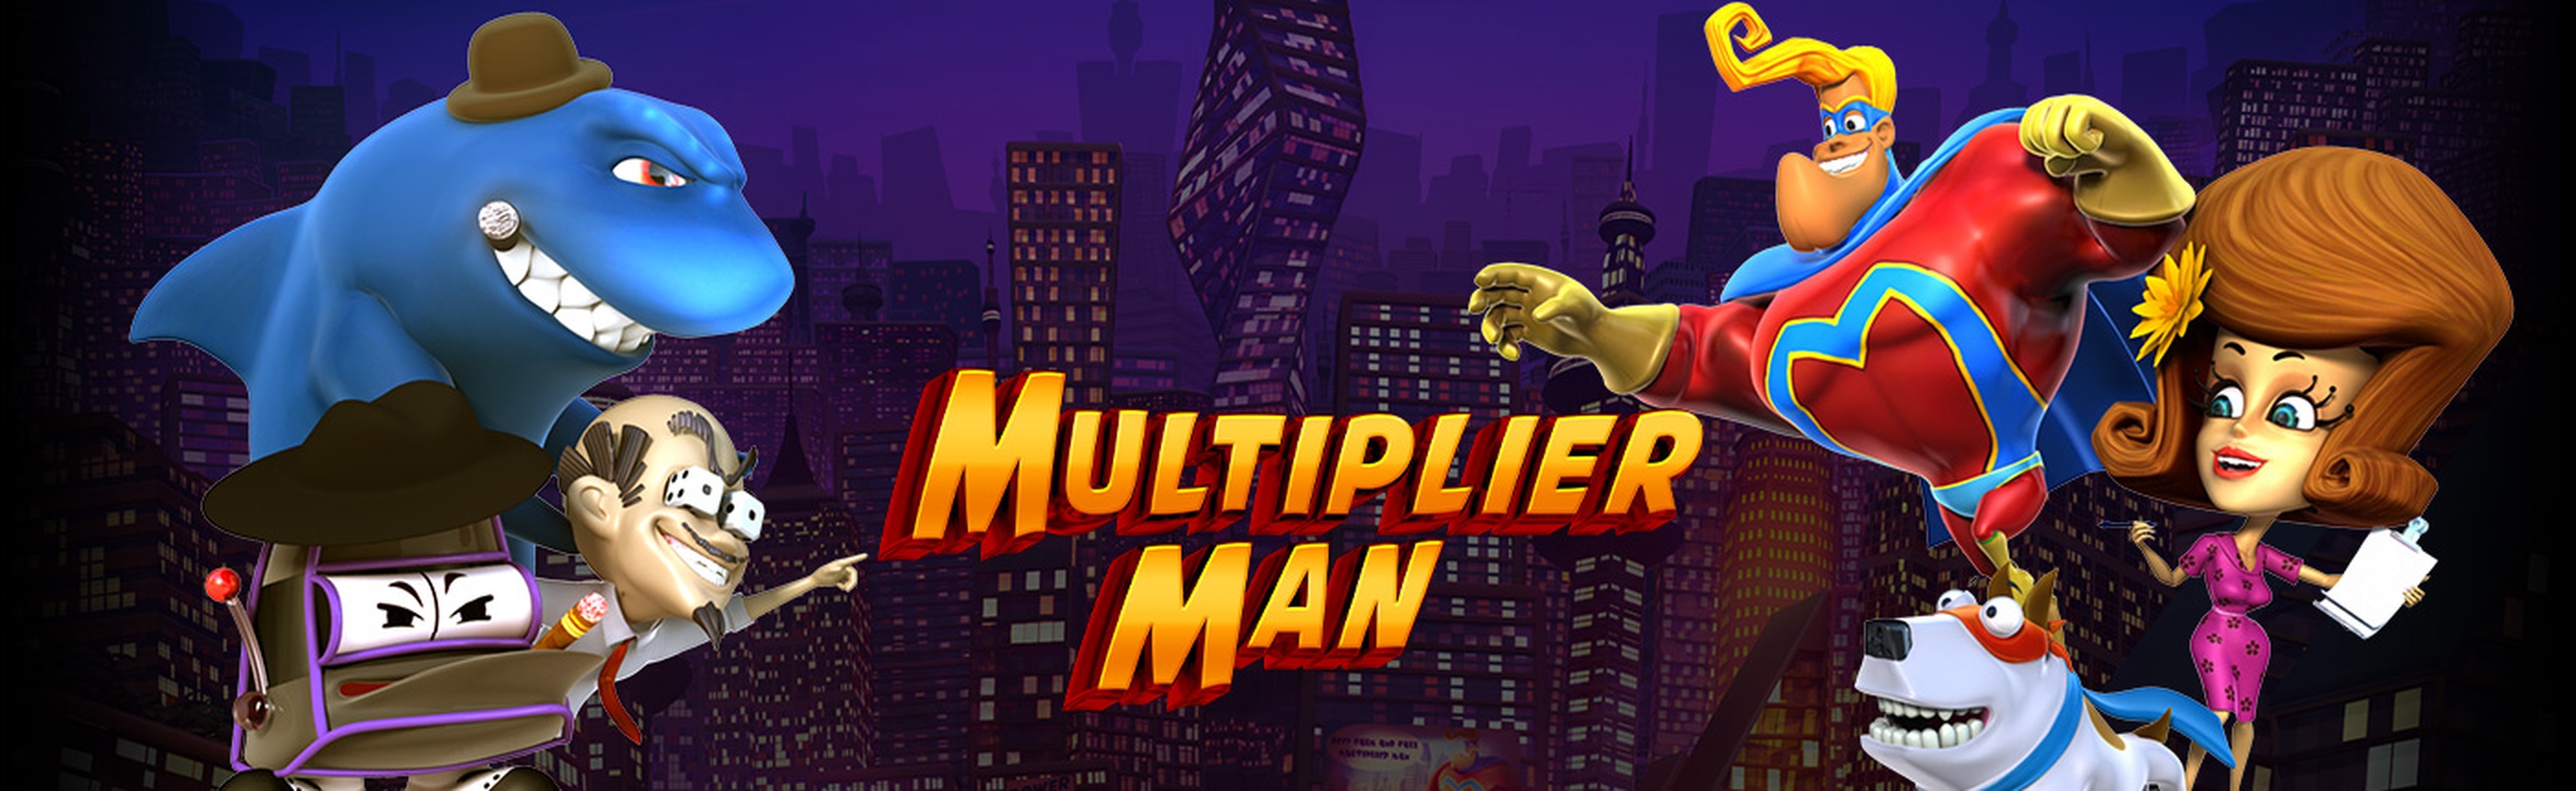 The Multiplier Man Online Slot Demo Game by Revolver Gaming